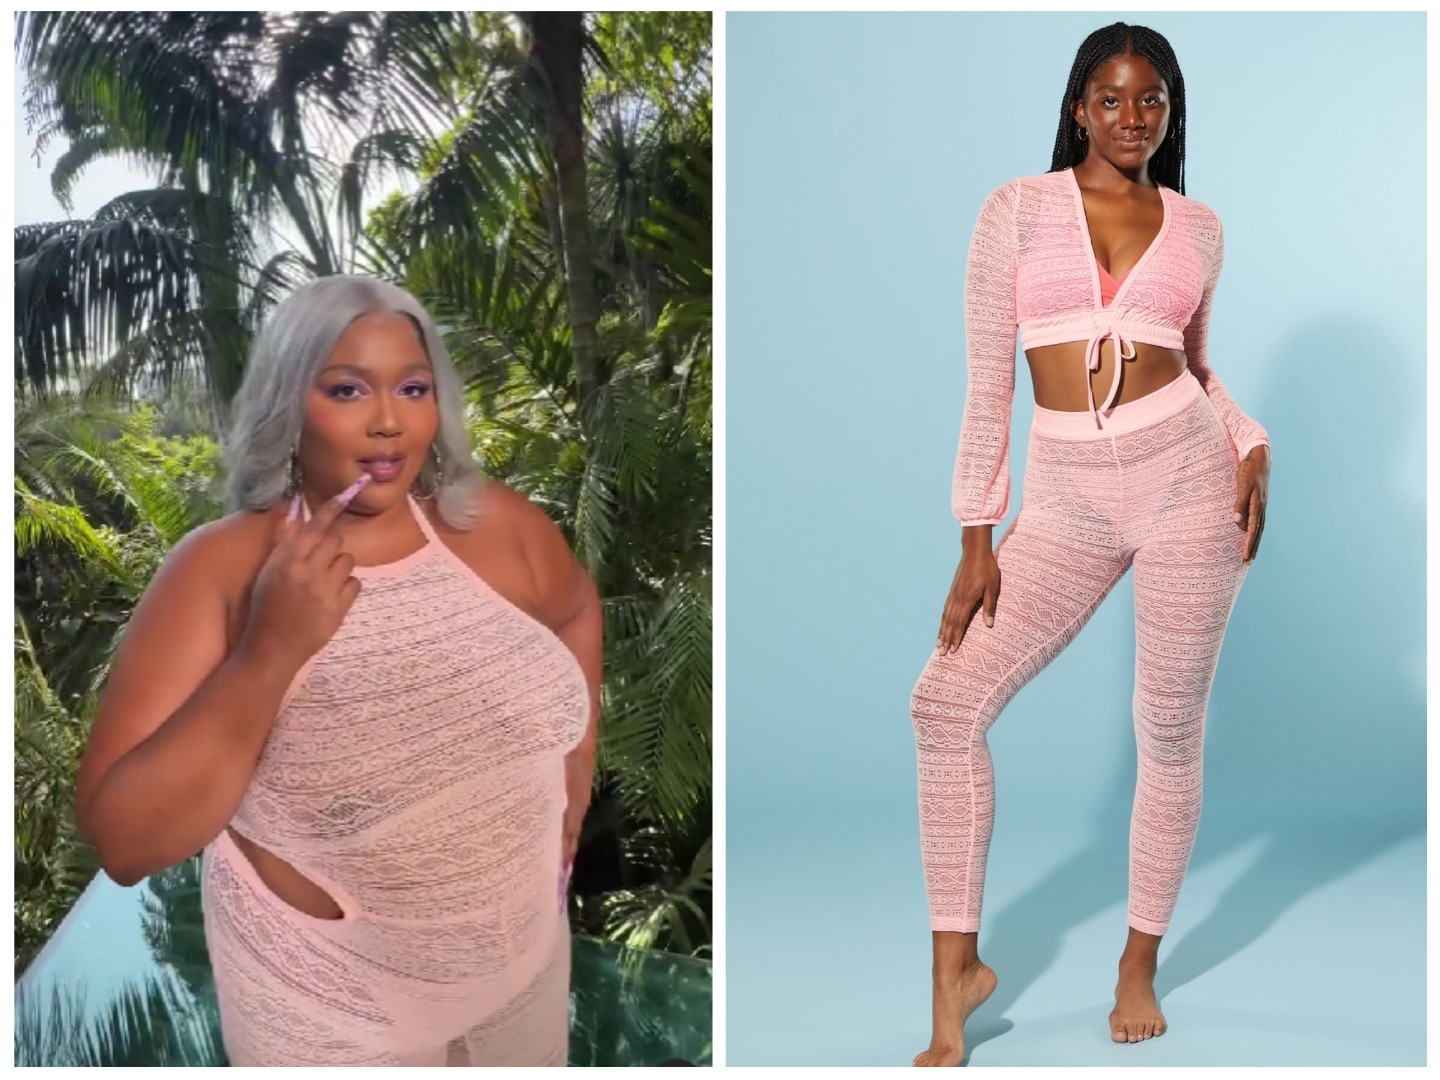 Lizzo wants you to free the 'knit-pple' with new Yitty knitwear range